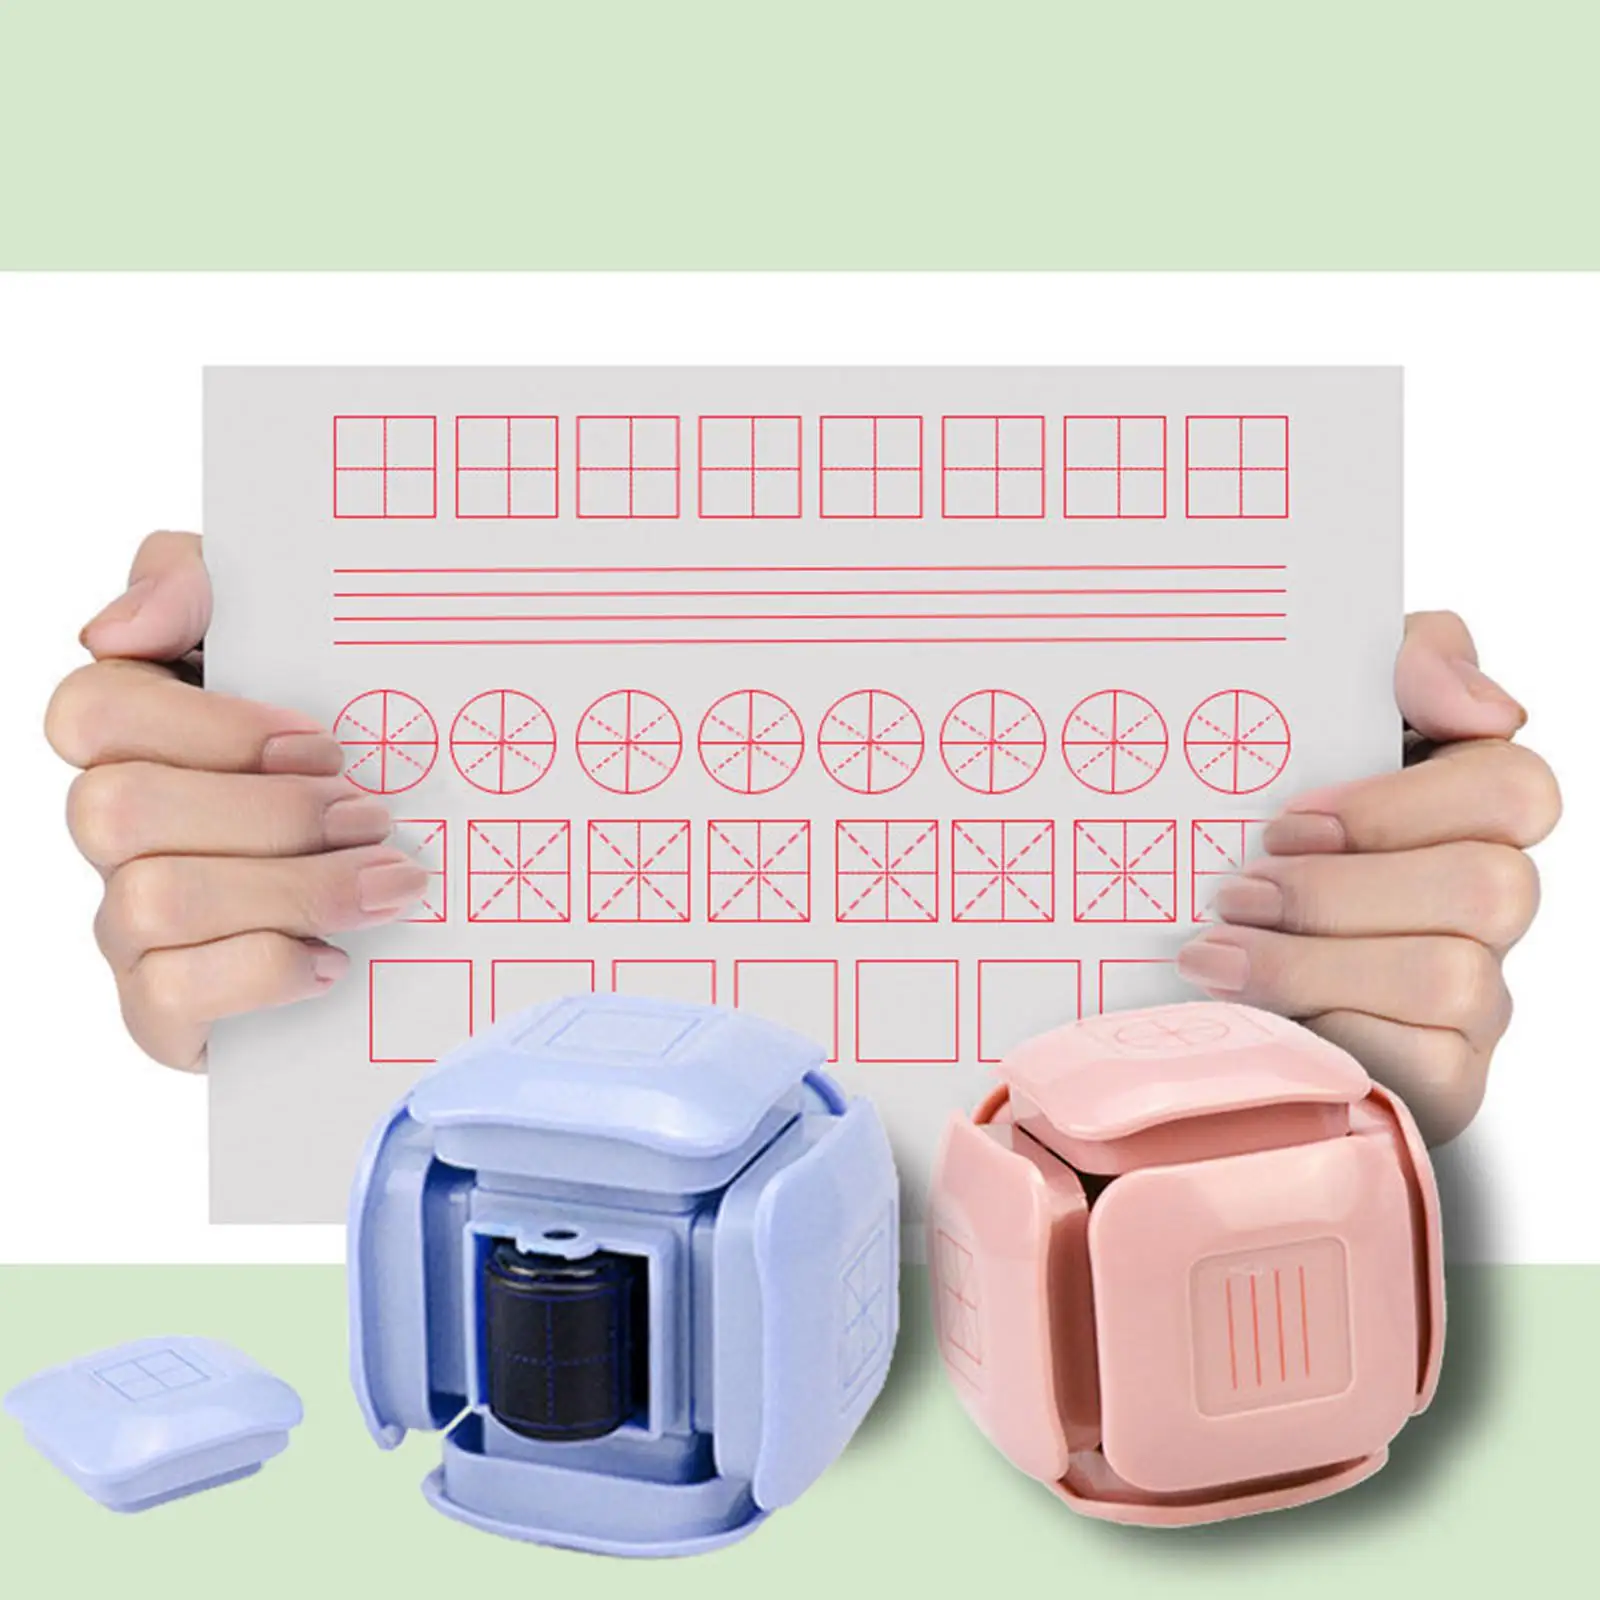 Portable Teaching Stamp Educational Toy Learning Stationery 6 in 1 Primary School Teacher Accessories Parents Children